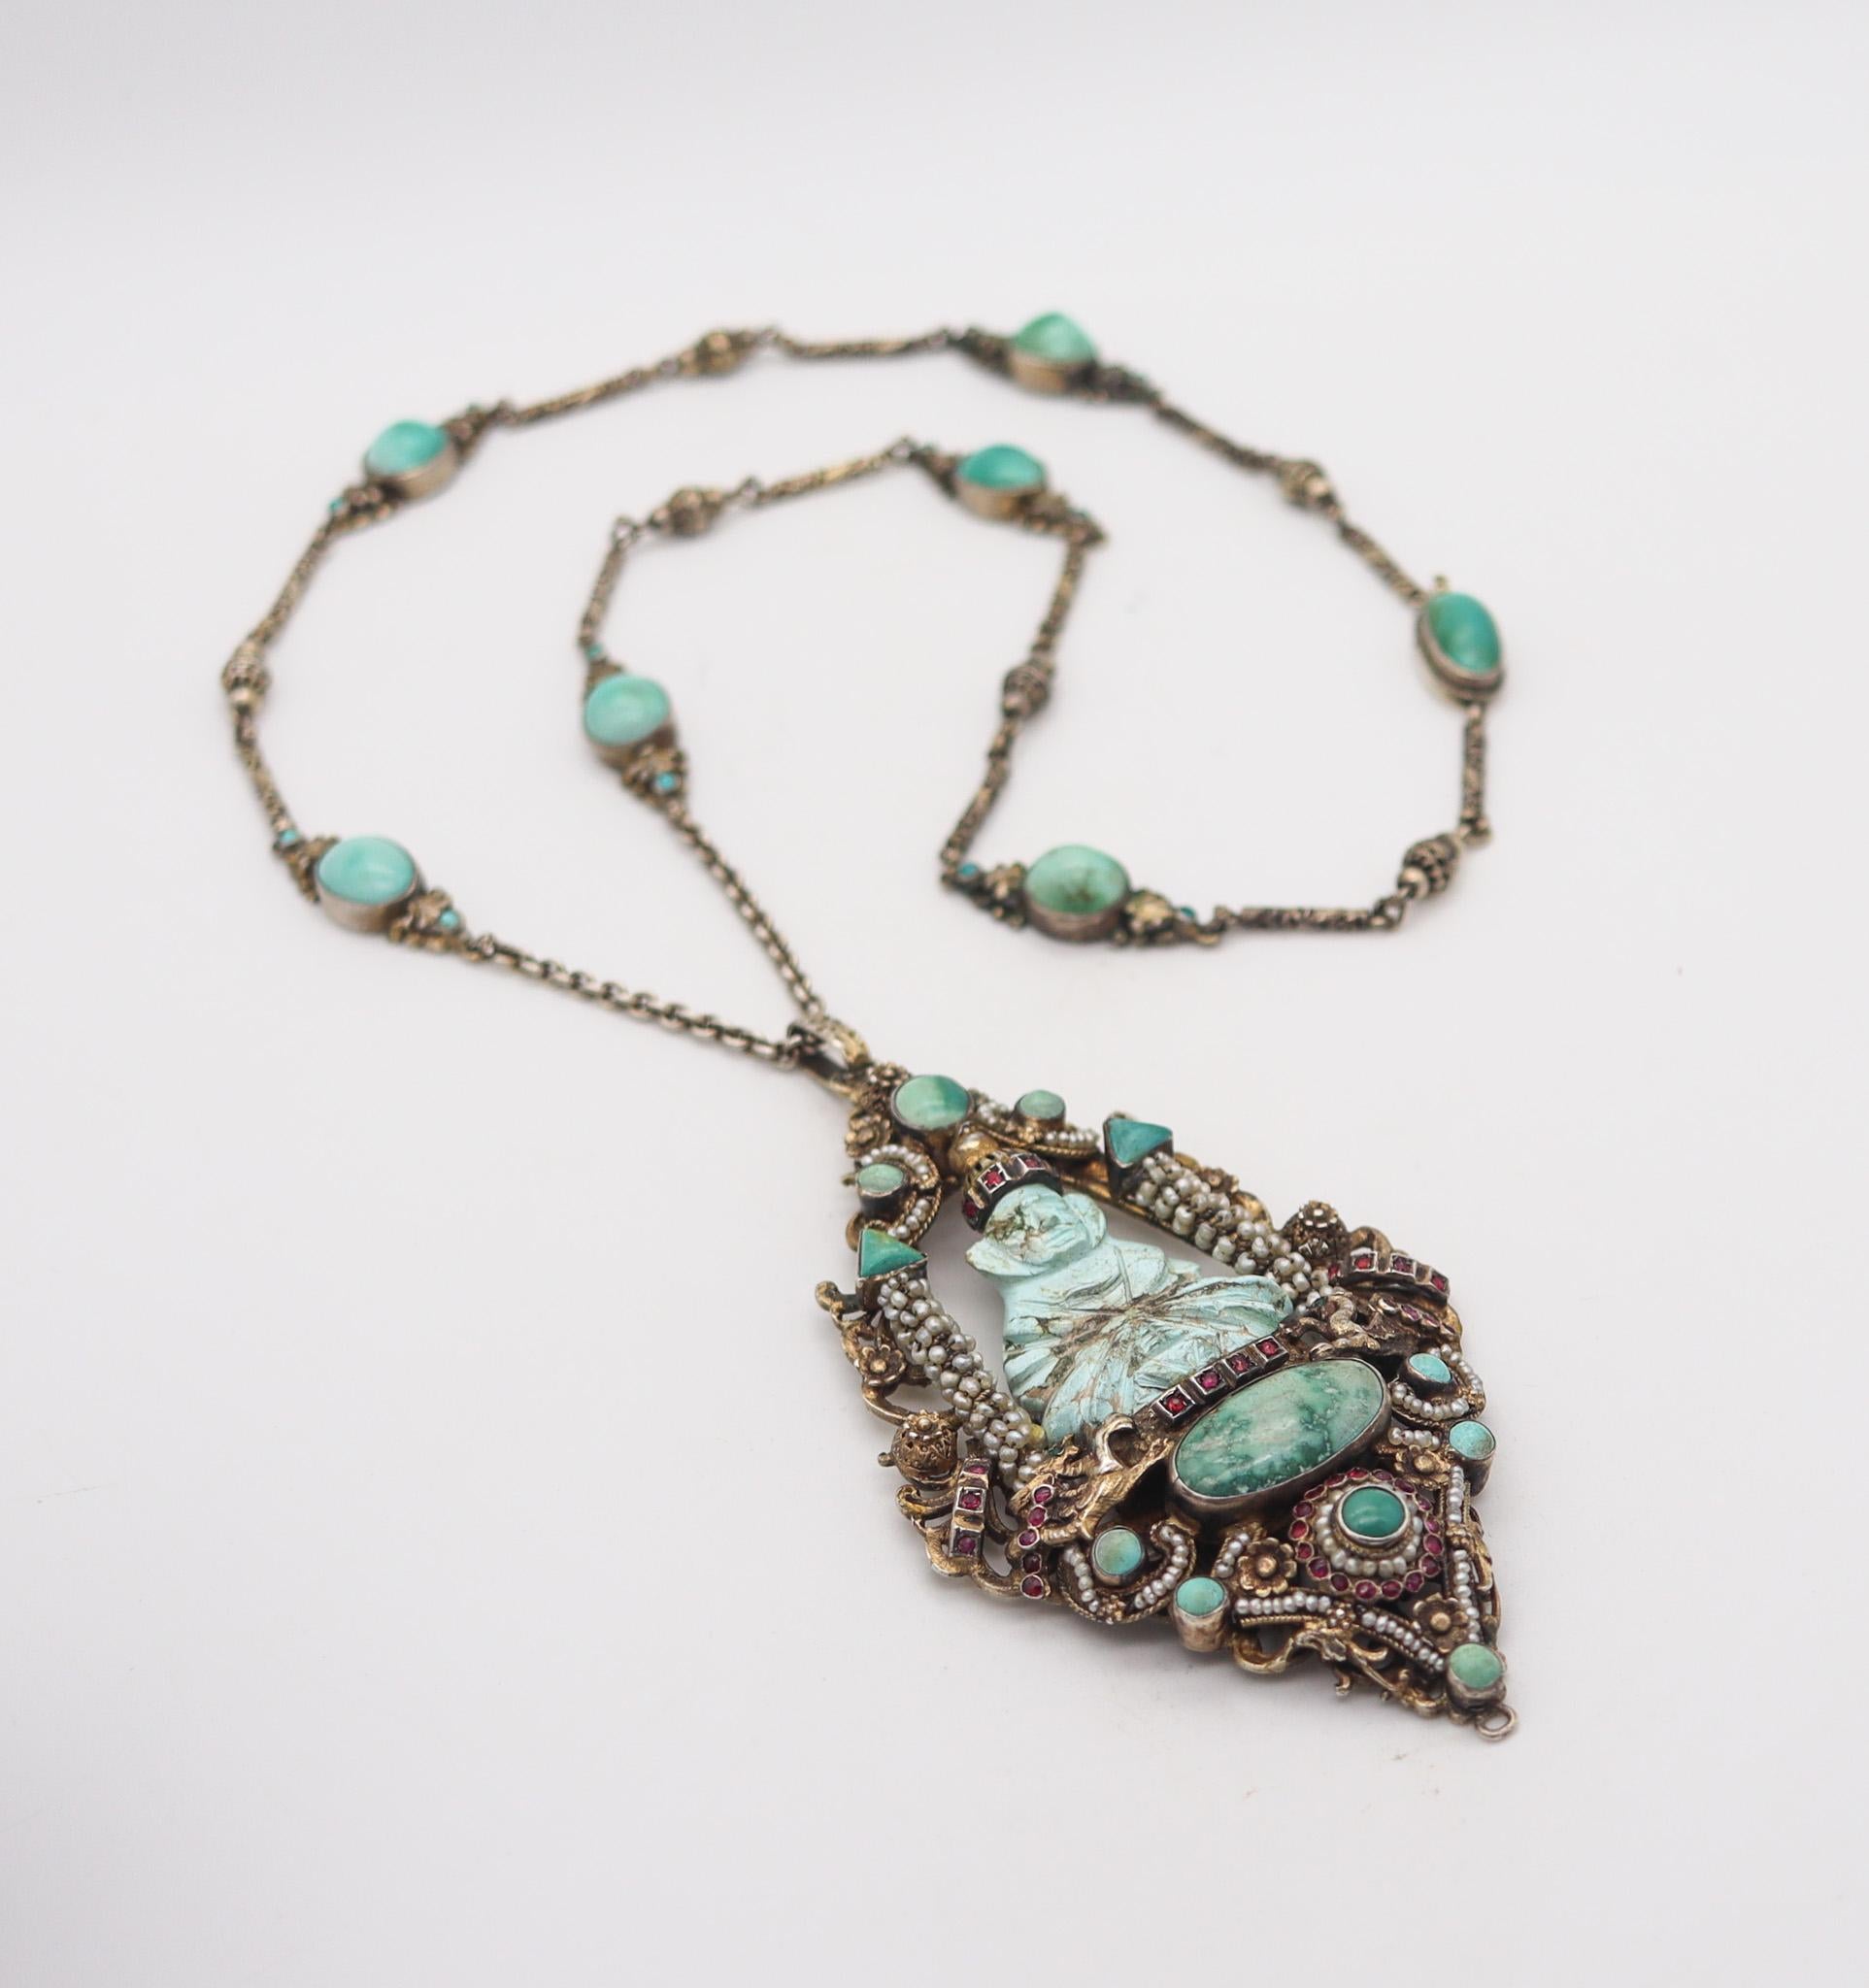 An Austrian-Hungarian orientalism pendant sautoir with turquoises.

This beautiful and extraordinary pendant necklace-sautoir is one of the best example we have ever seen of Austrian-Hungarian empire jewelry. It was crafted in the turn of the